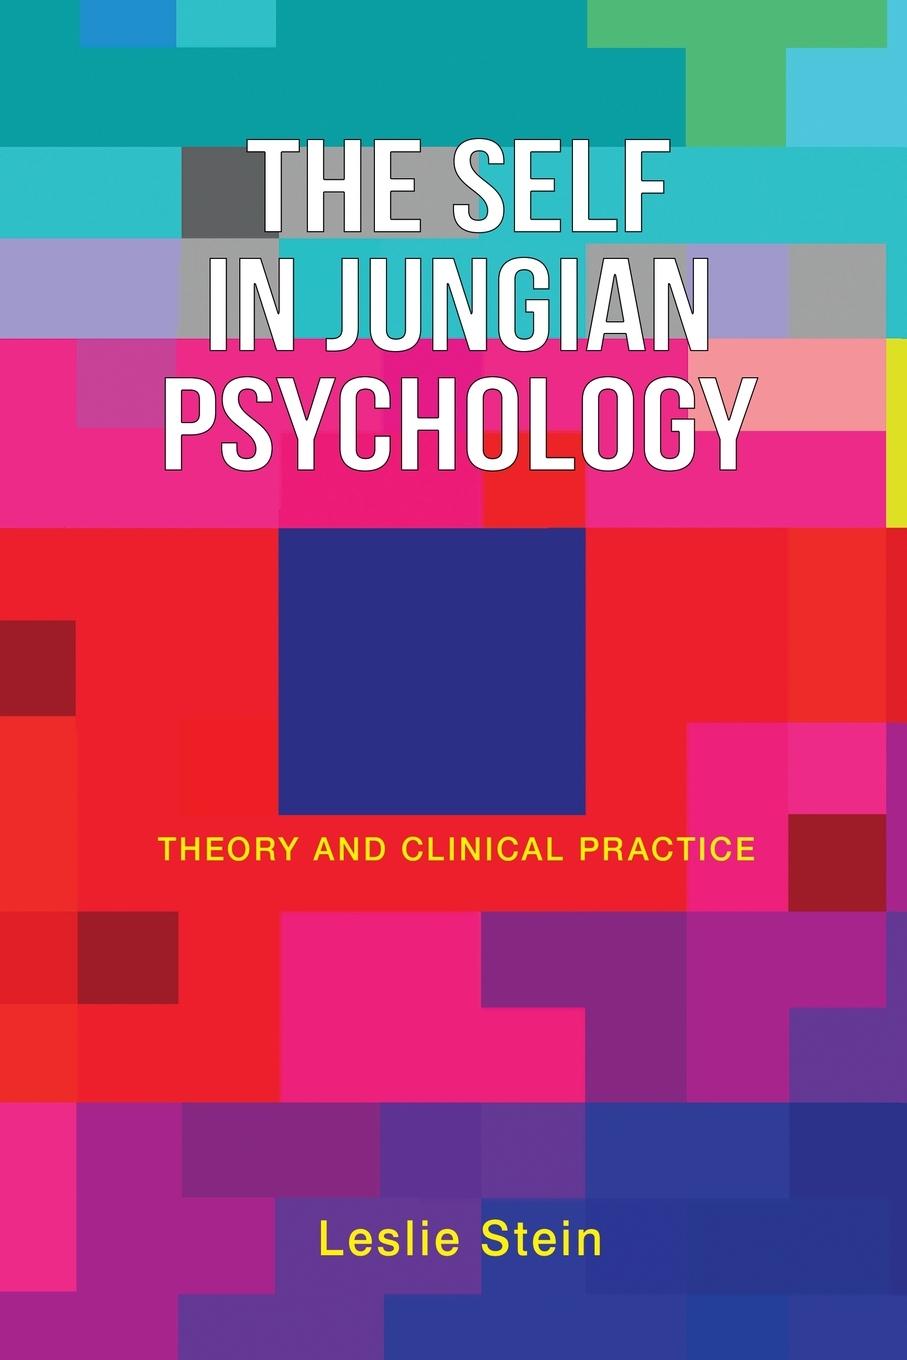 Book Self in Jungian Psychology Leslie Stein